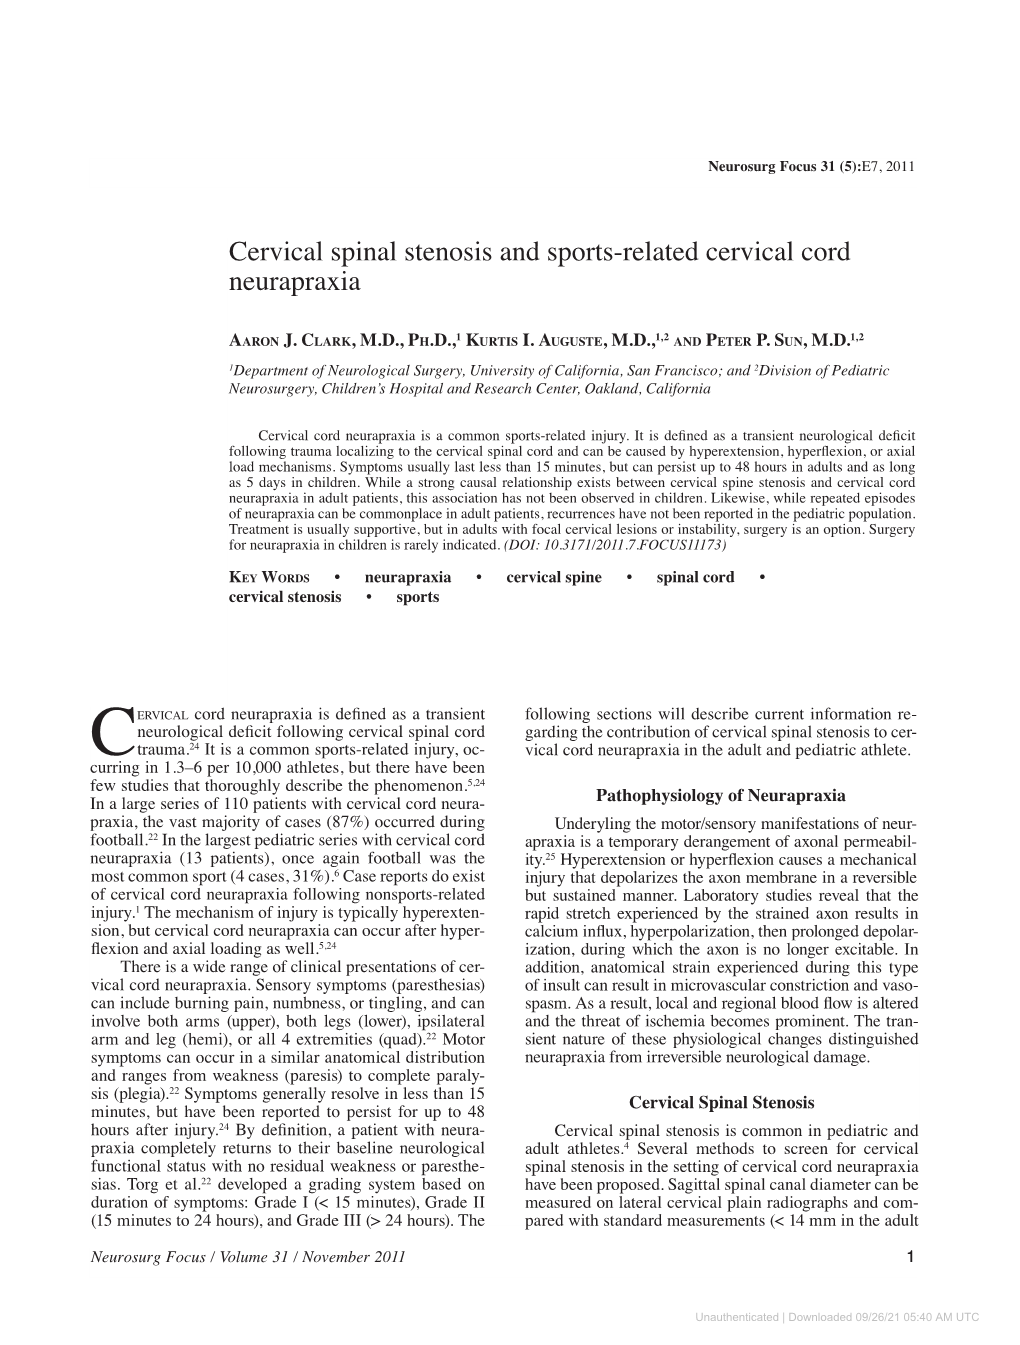 Cervical Spinal Stenosis and Sports-Related Cervical Cord Neurapraxia